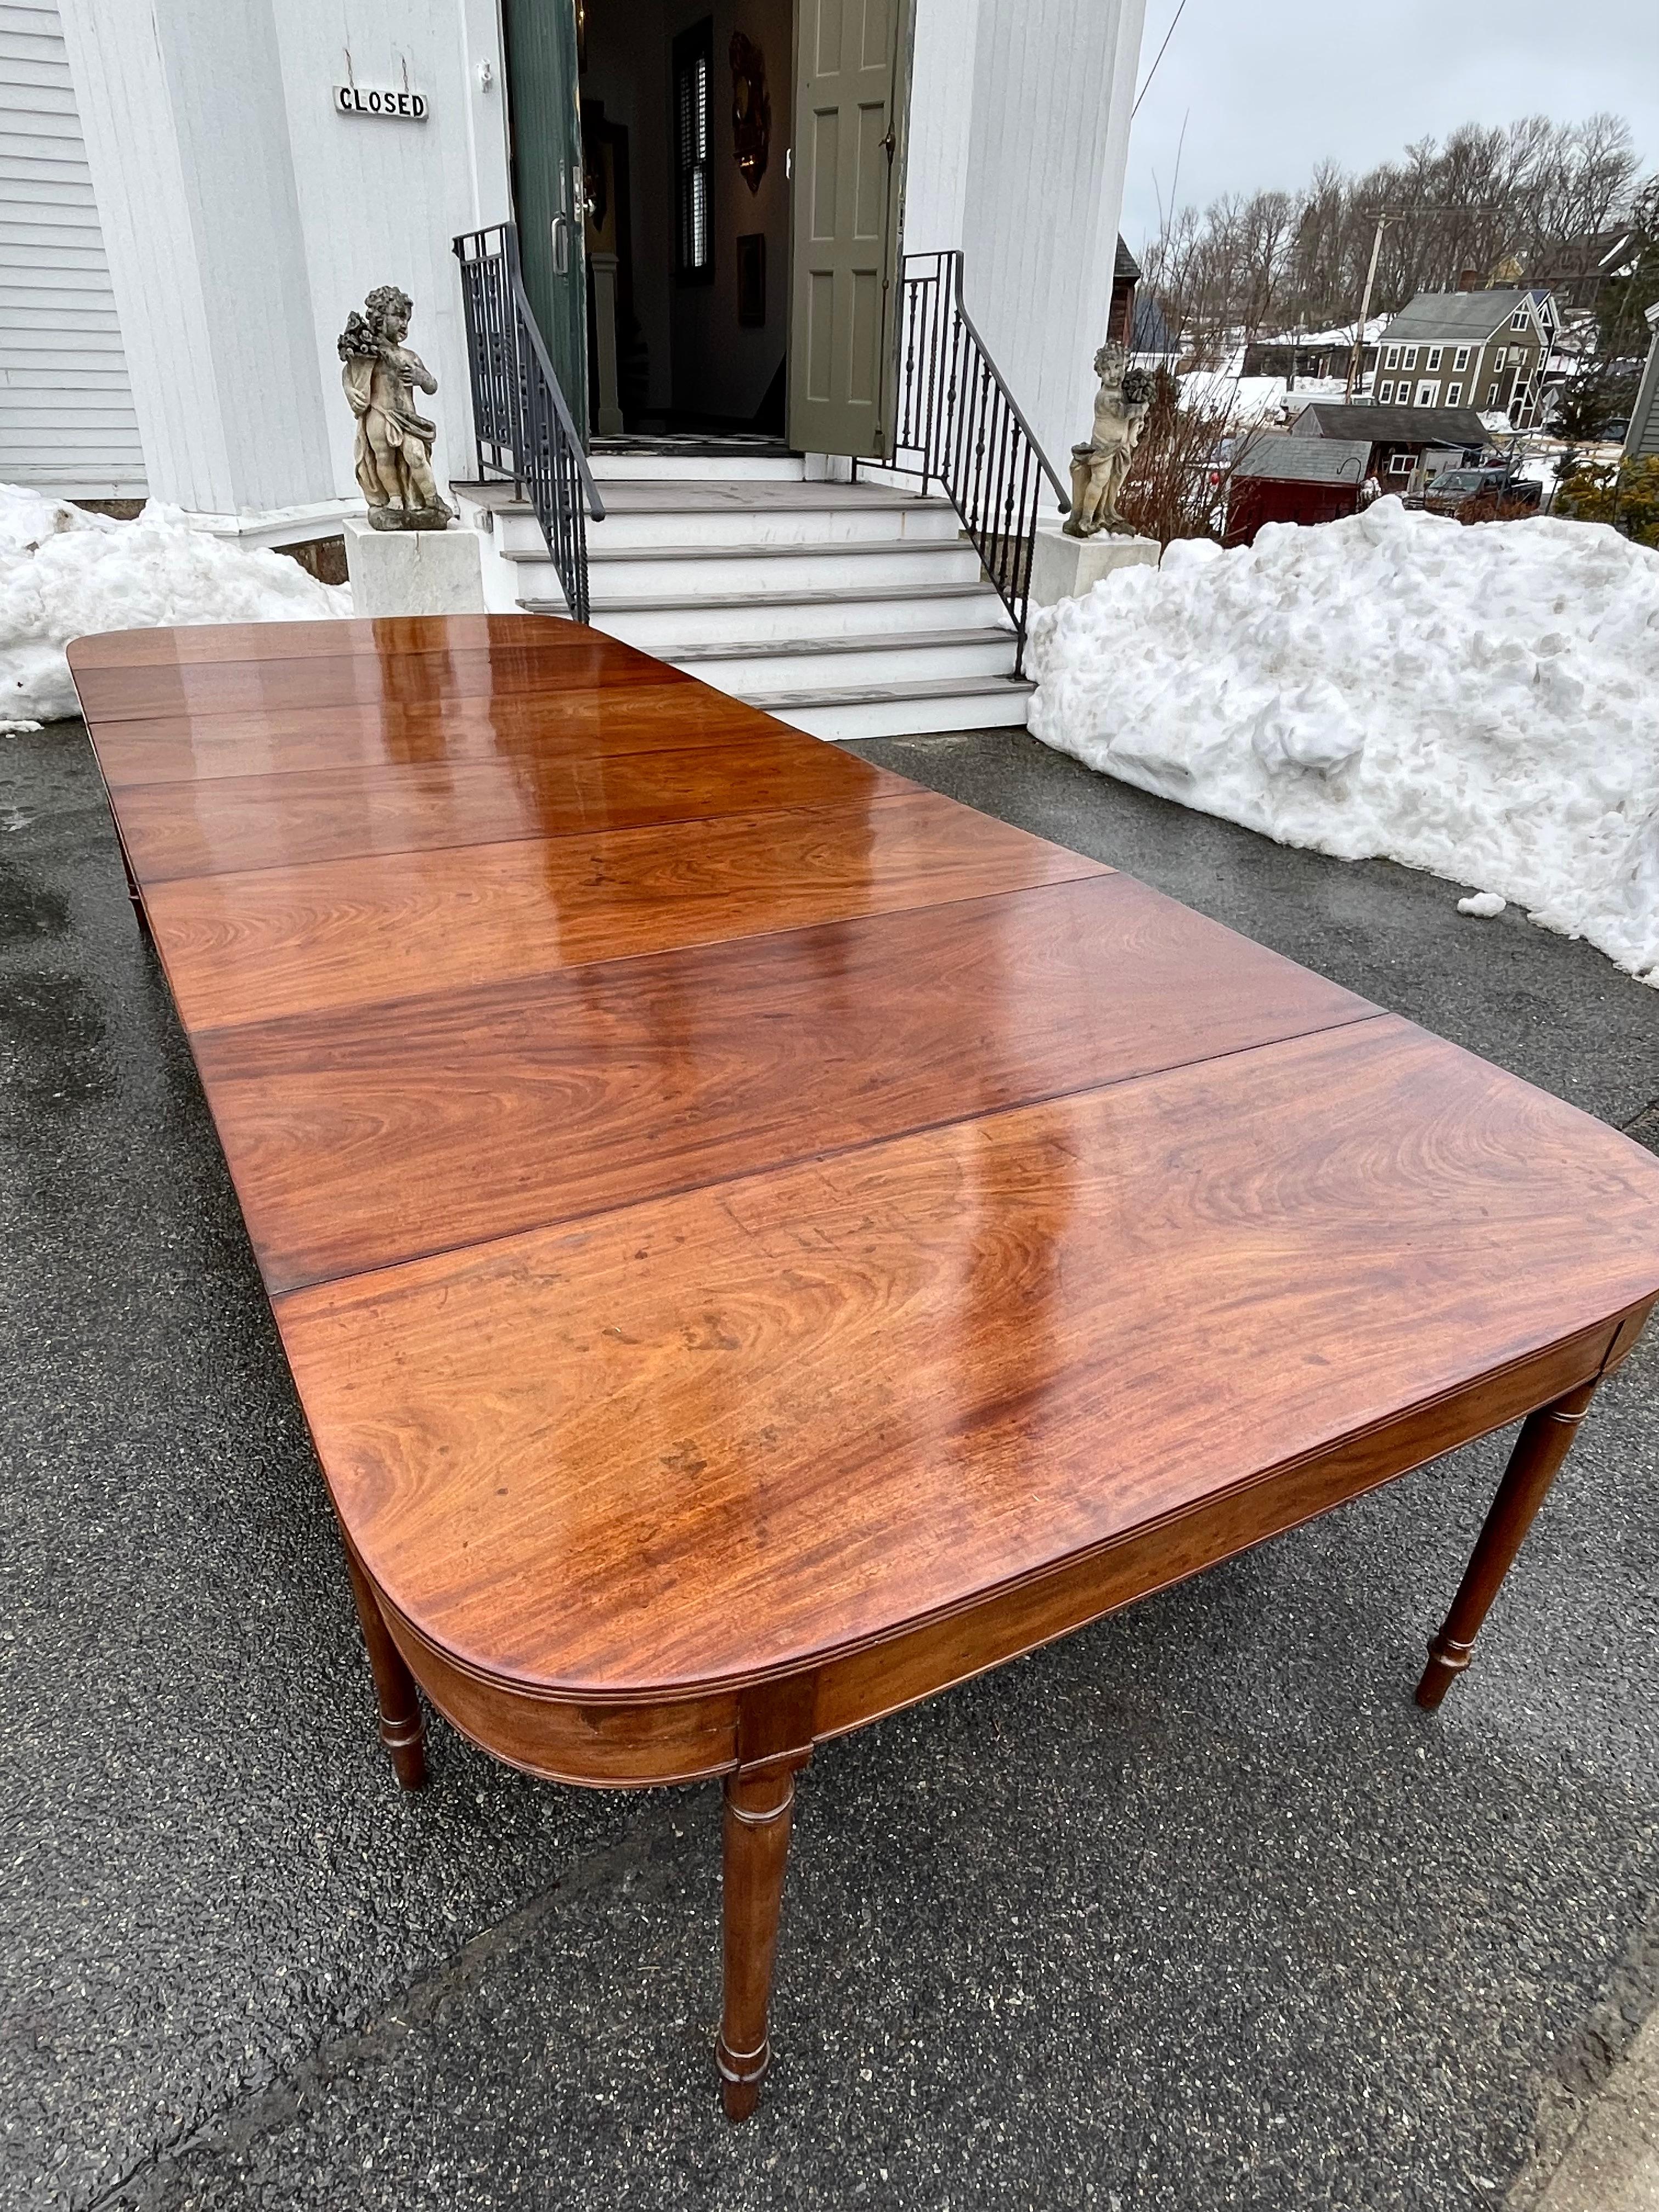 Mid-atlantic three-part late Federal mahogany Banquet table, a massive example, with center fall leaf section flanked by matching D-shaped ends, each with hinged fall leaf, top with reeded edge profile, all raised on ring-turned legs. Oak and pine